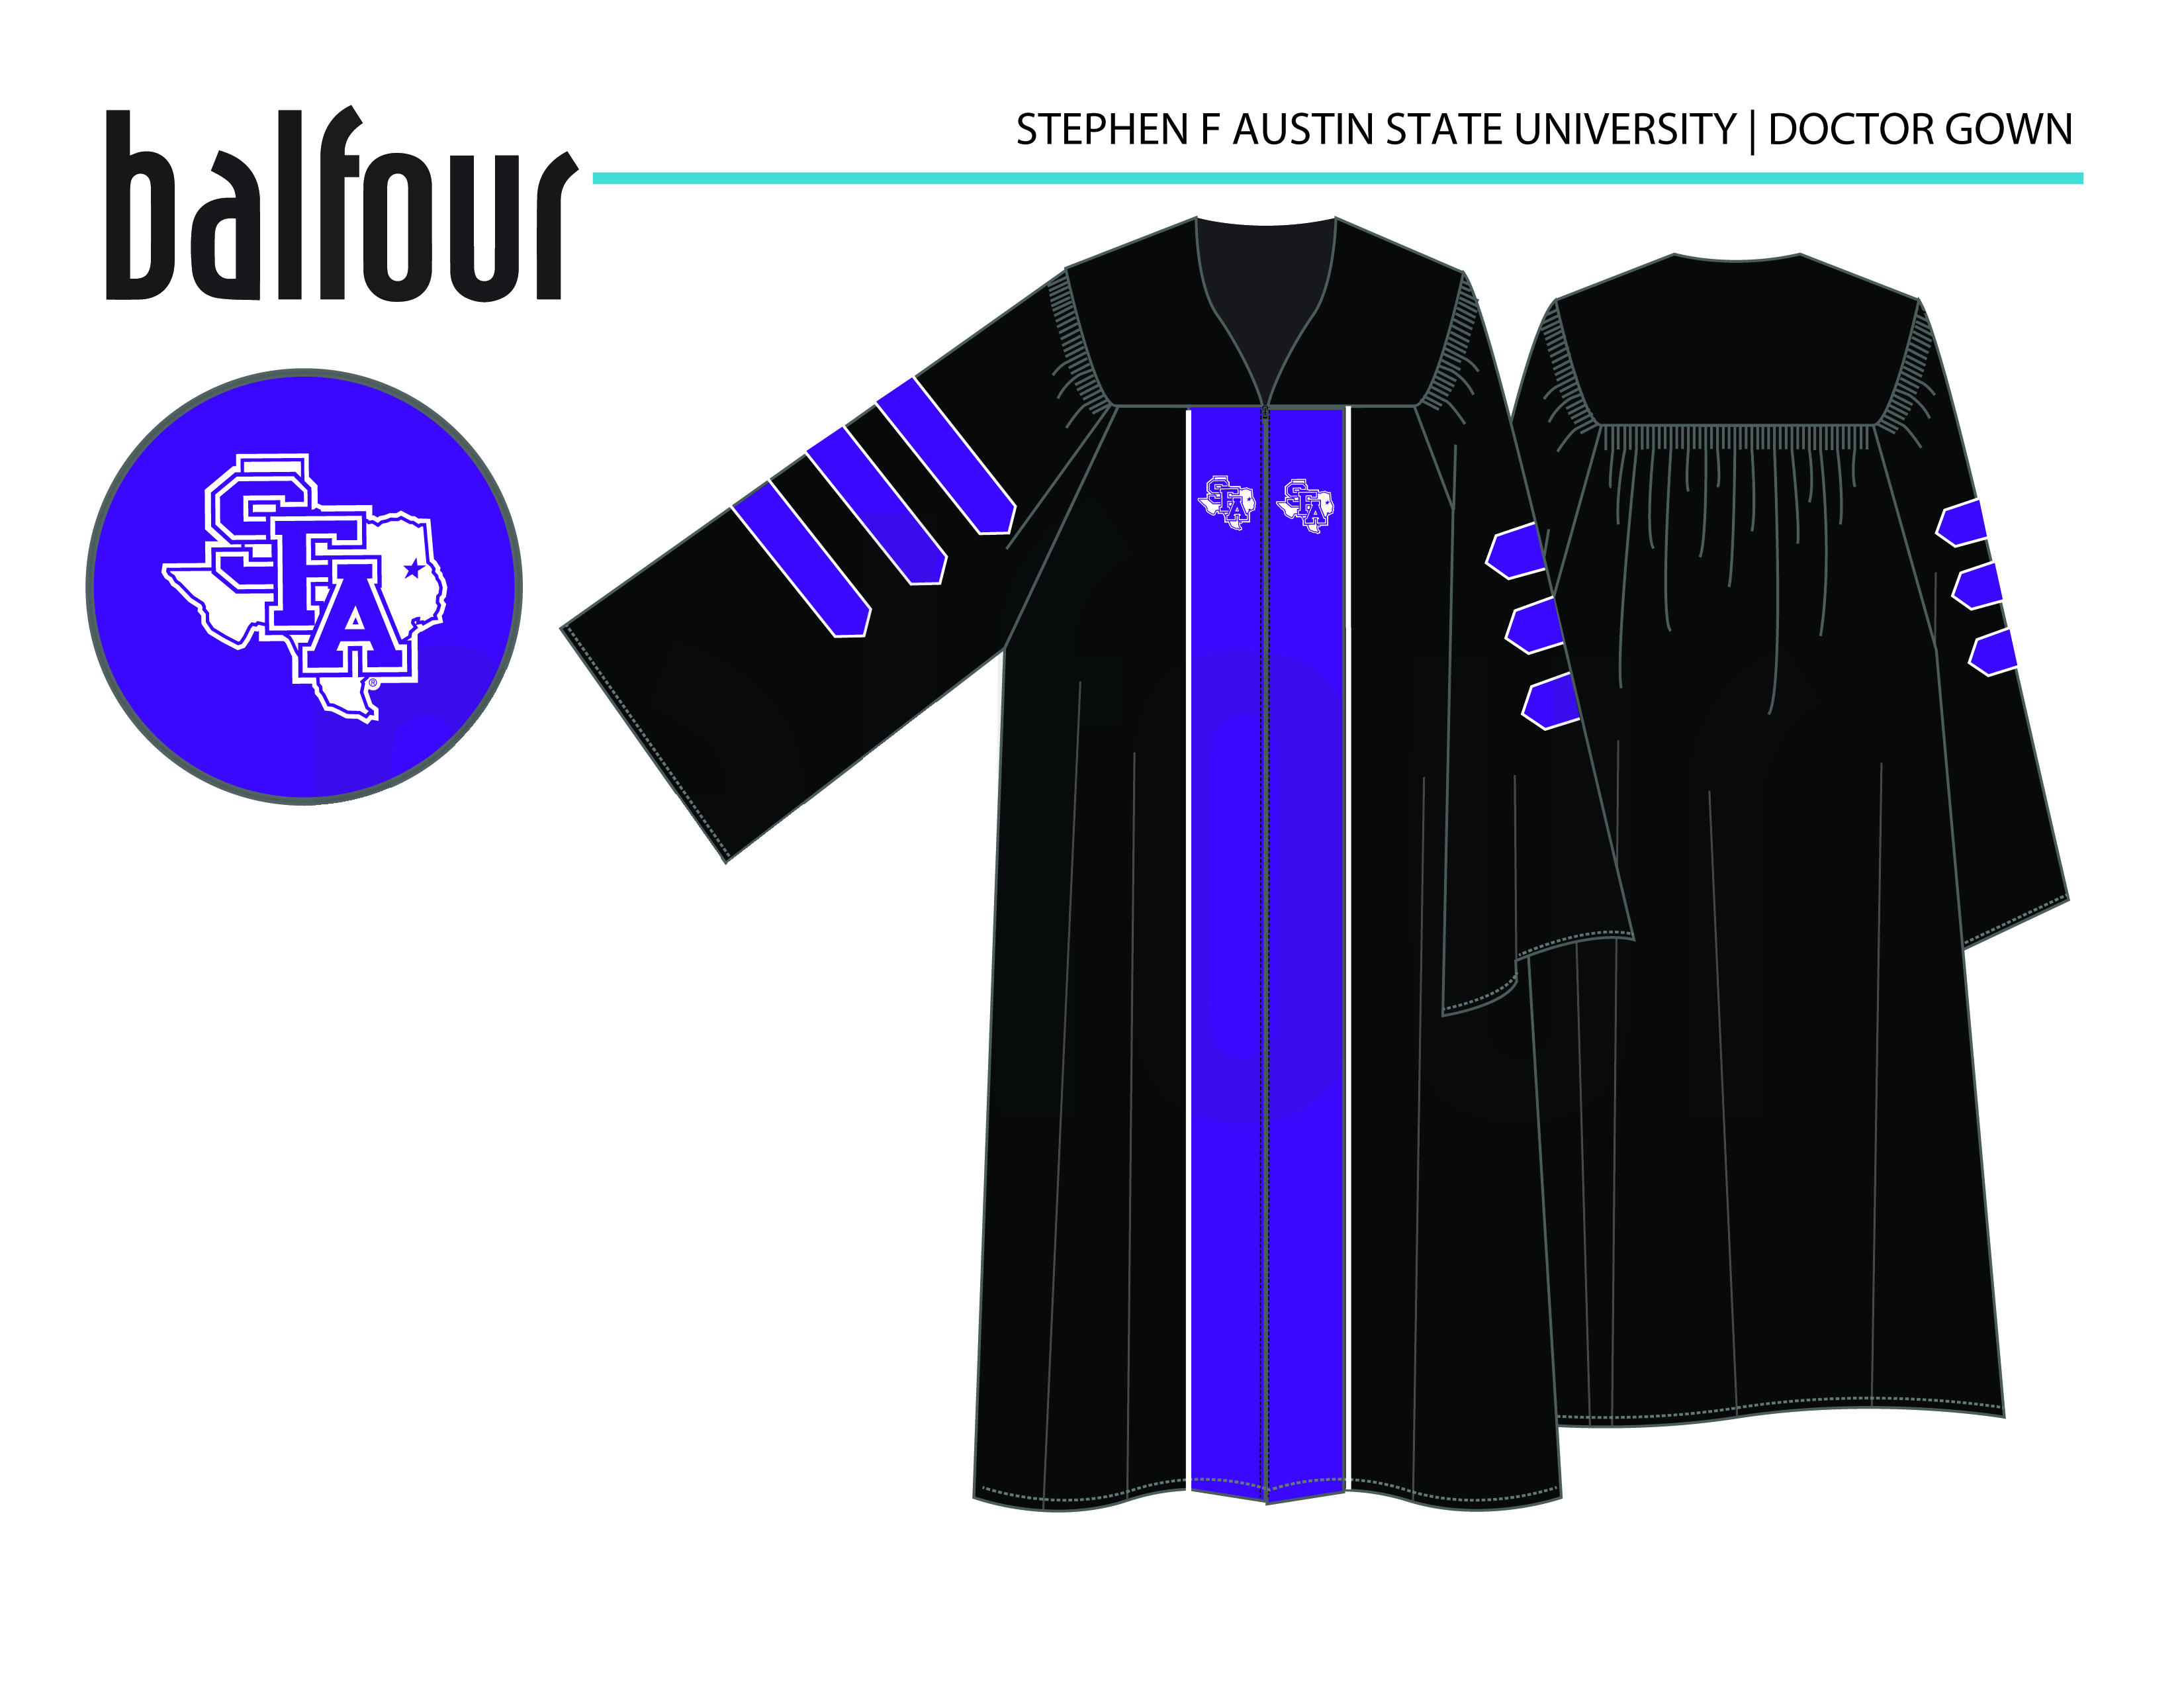 SFA Doctor Gown